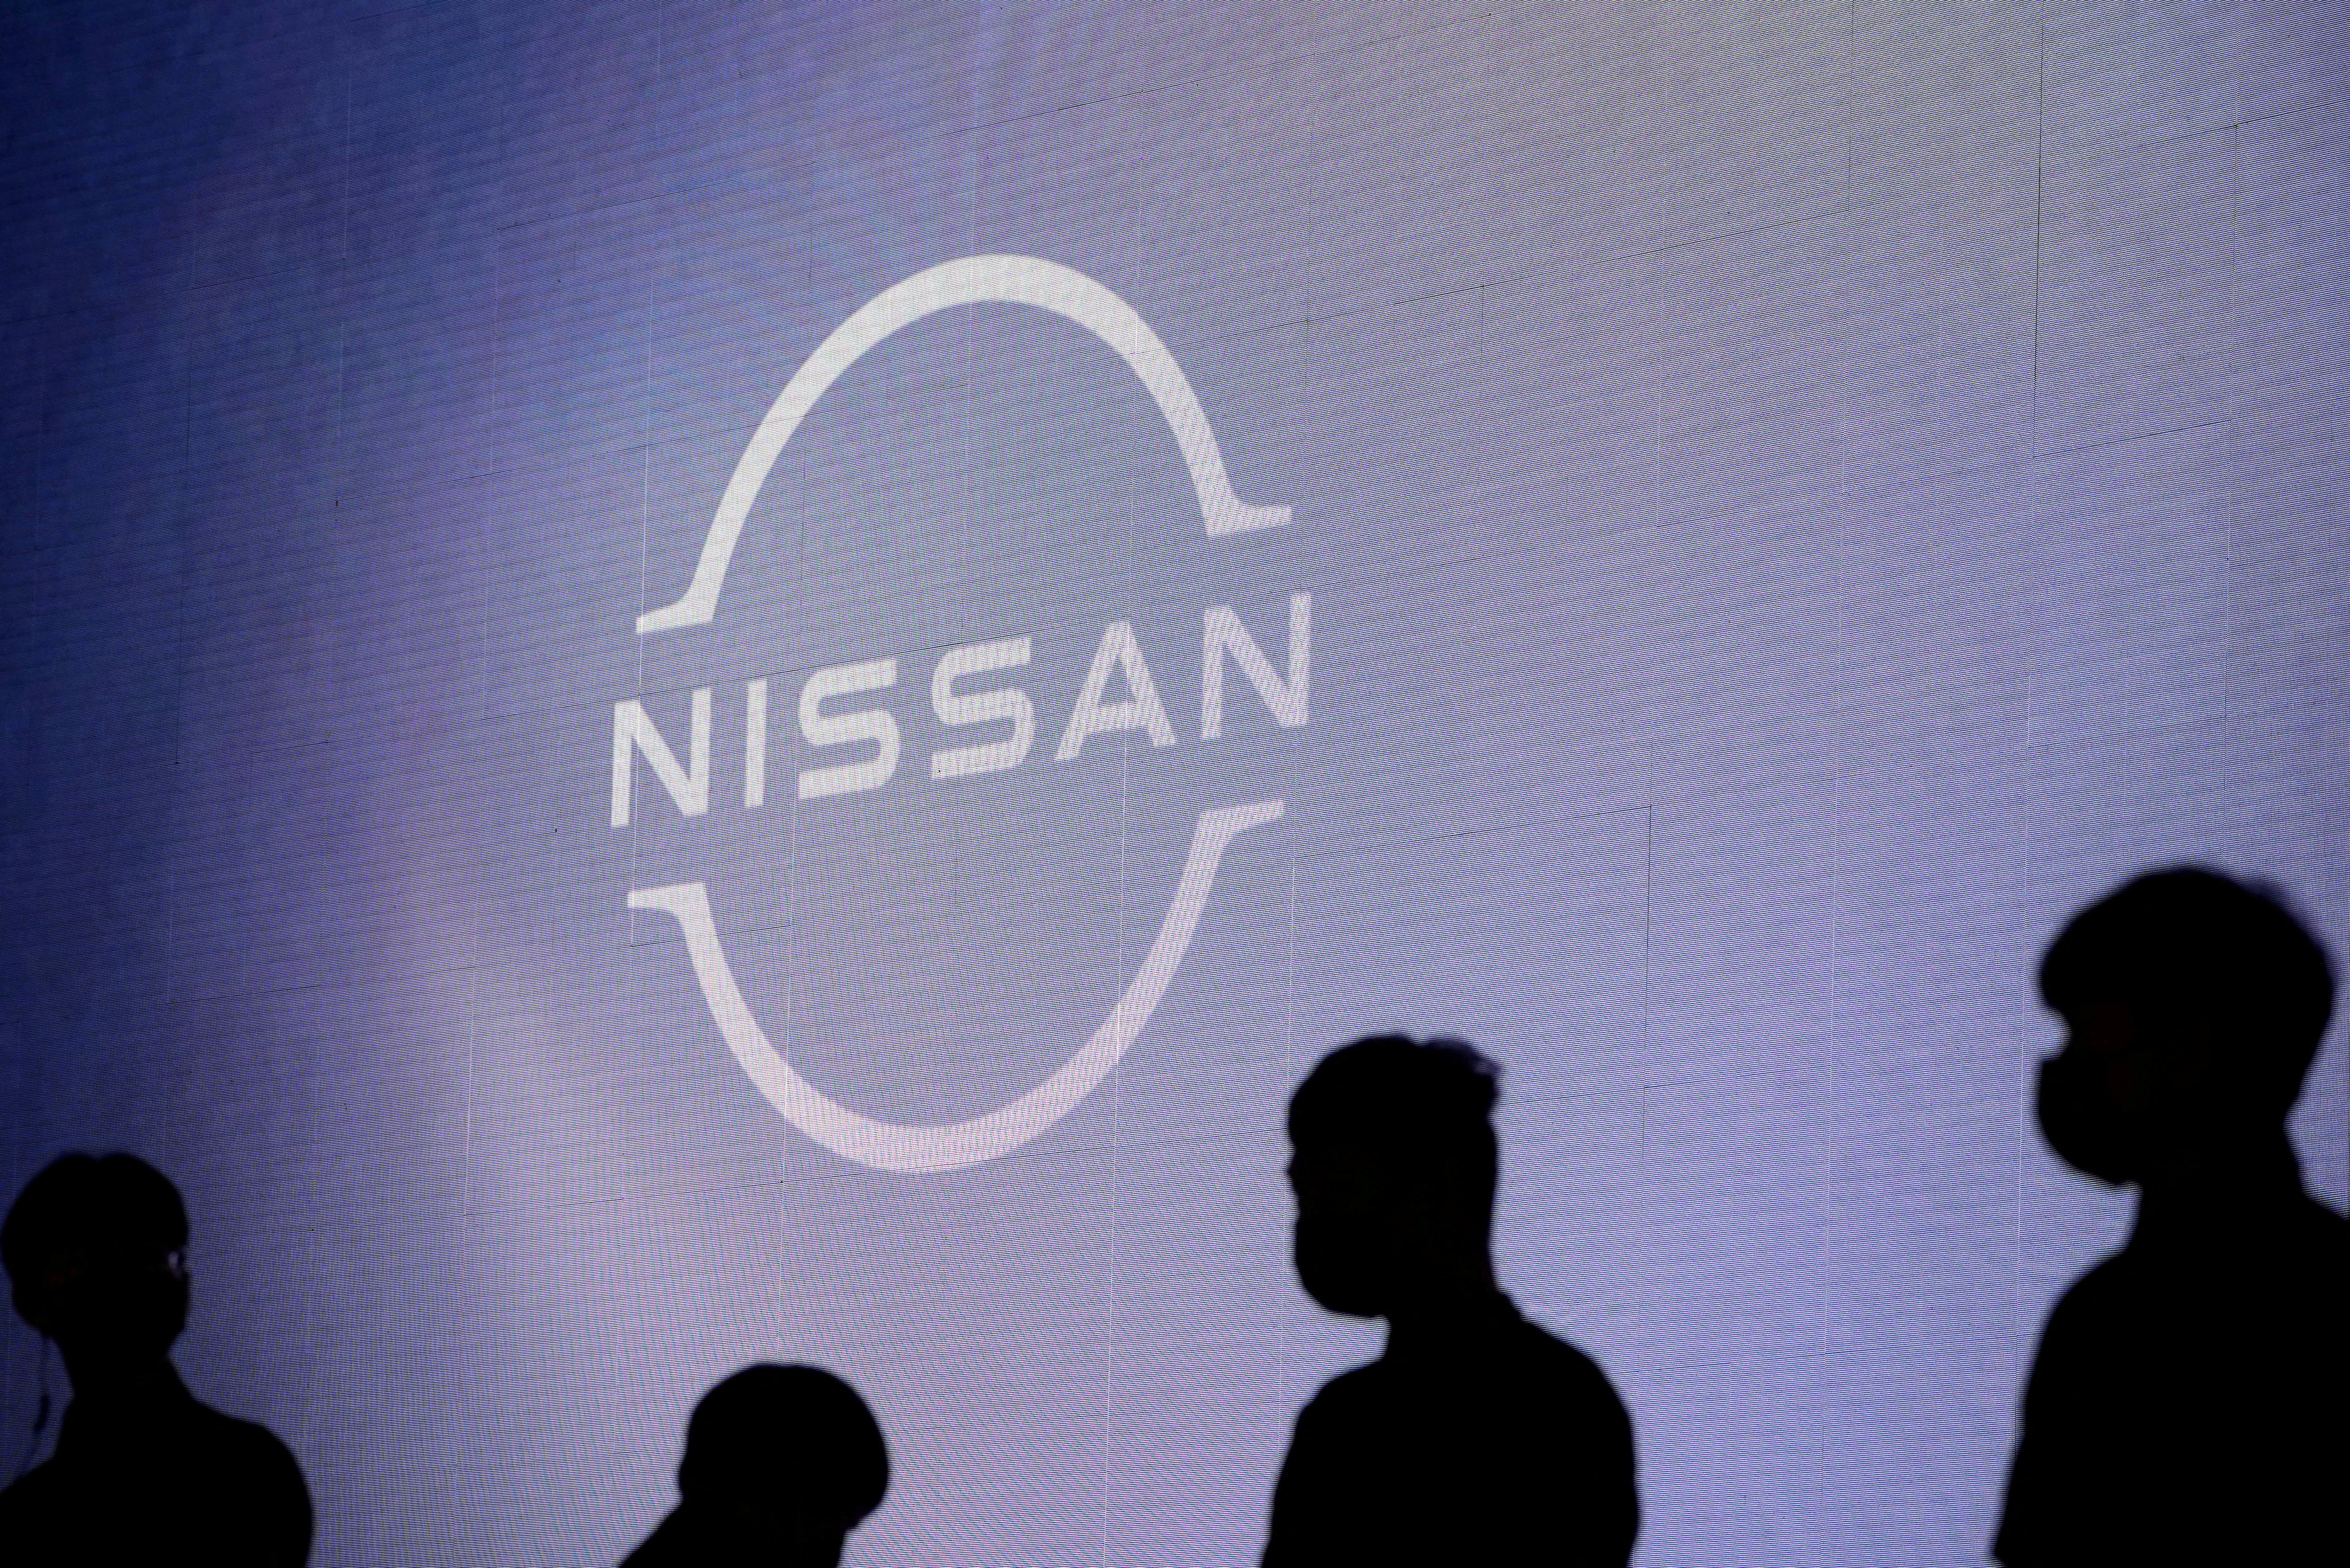 Nissan is betting big on China, with plans to export electric cars developed and manufactured in the country. Photo: Reuters